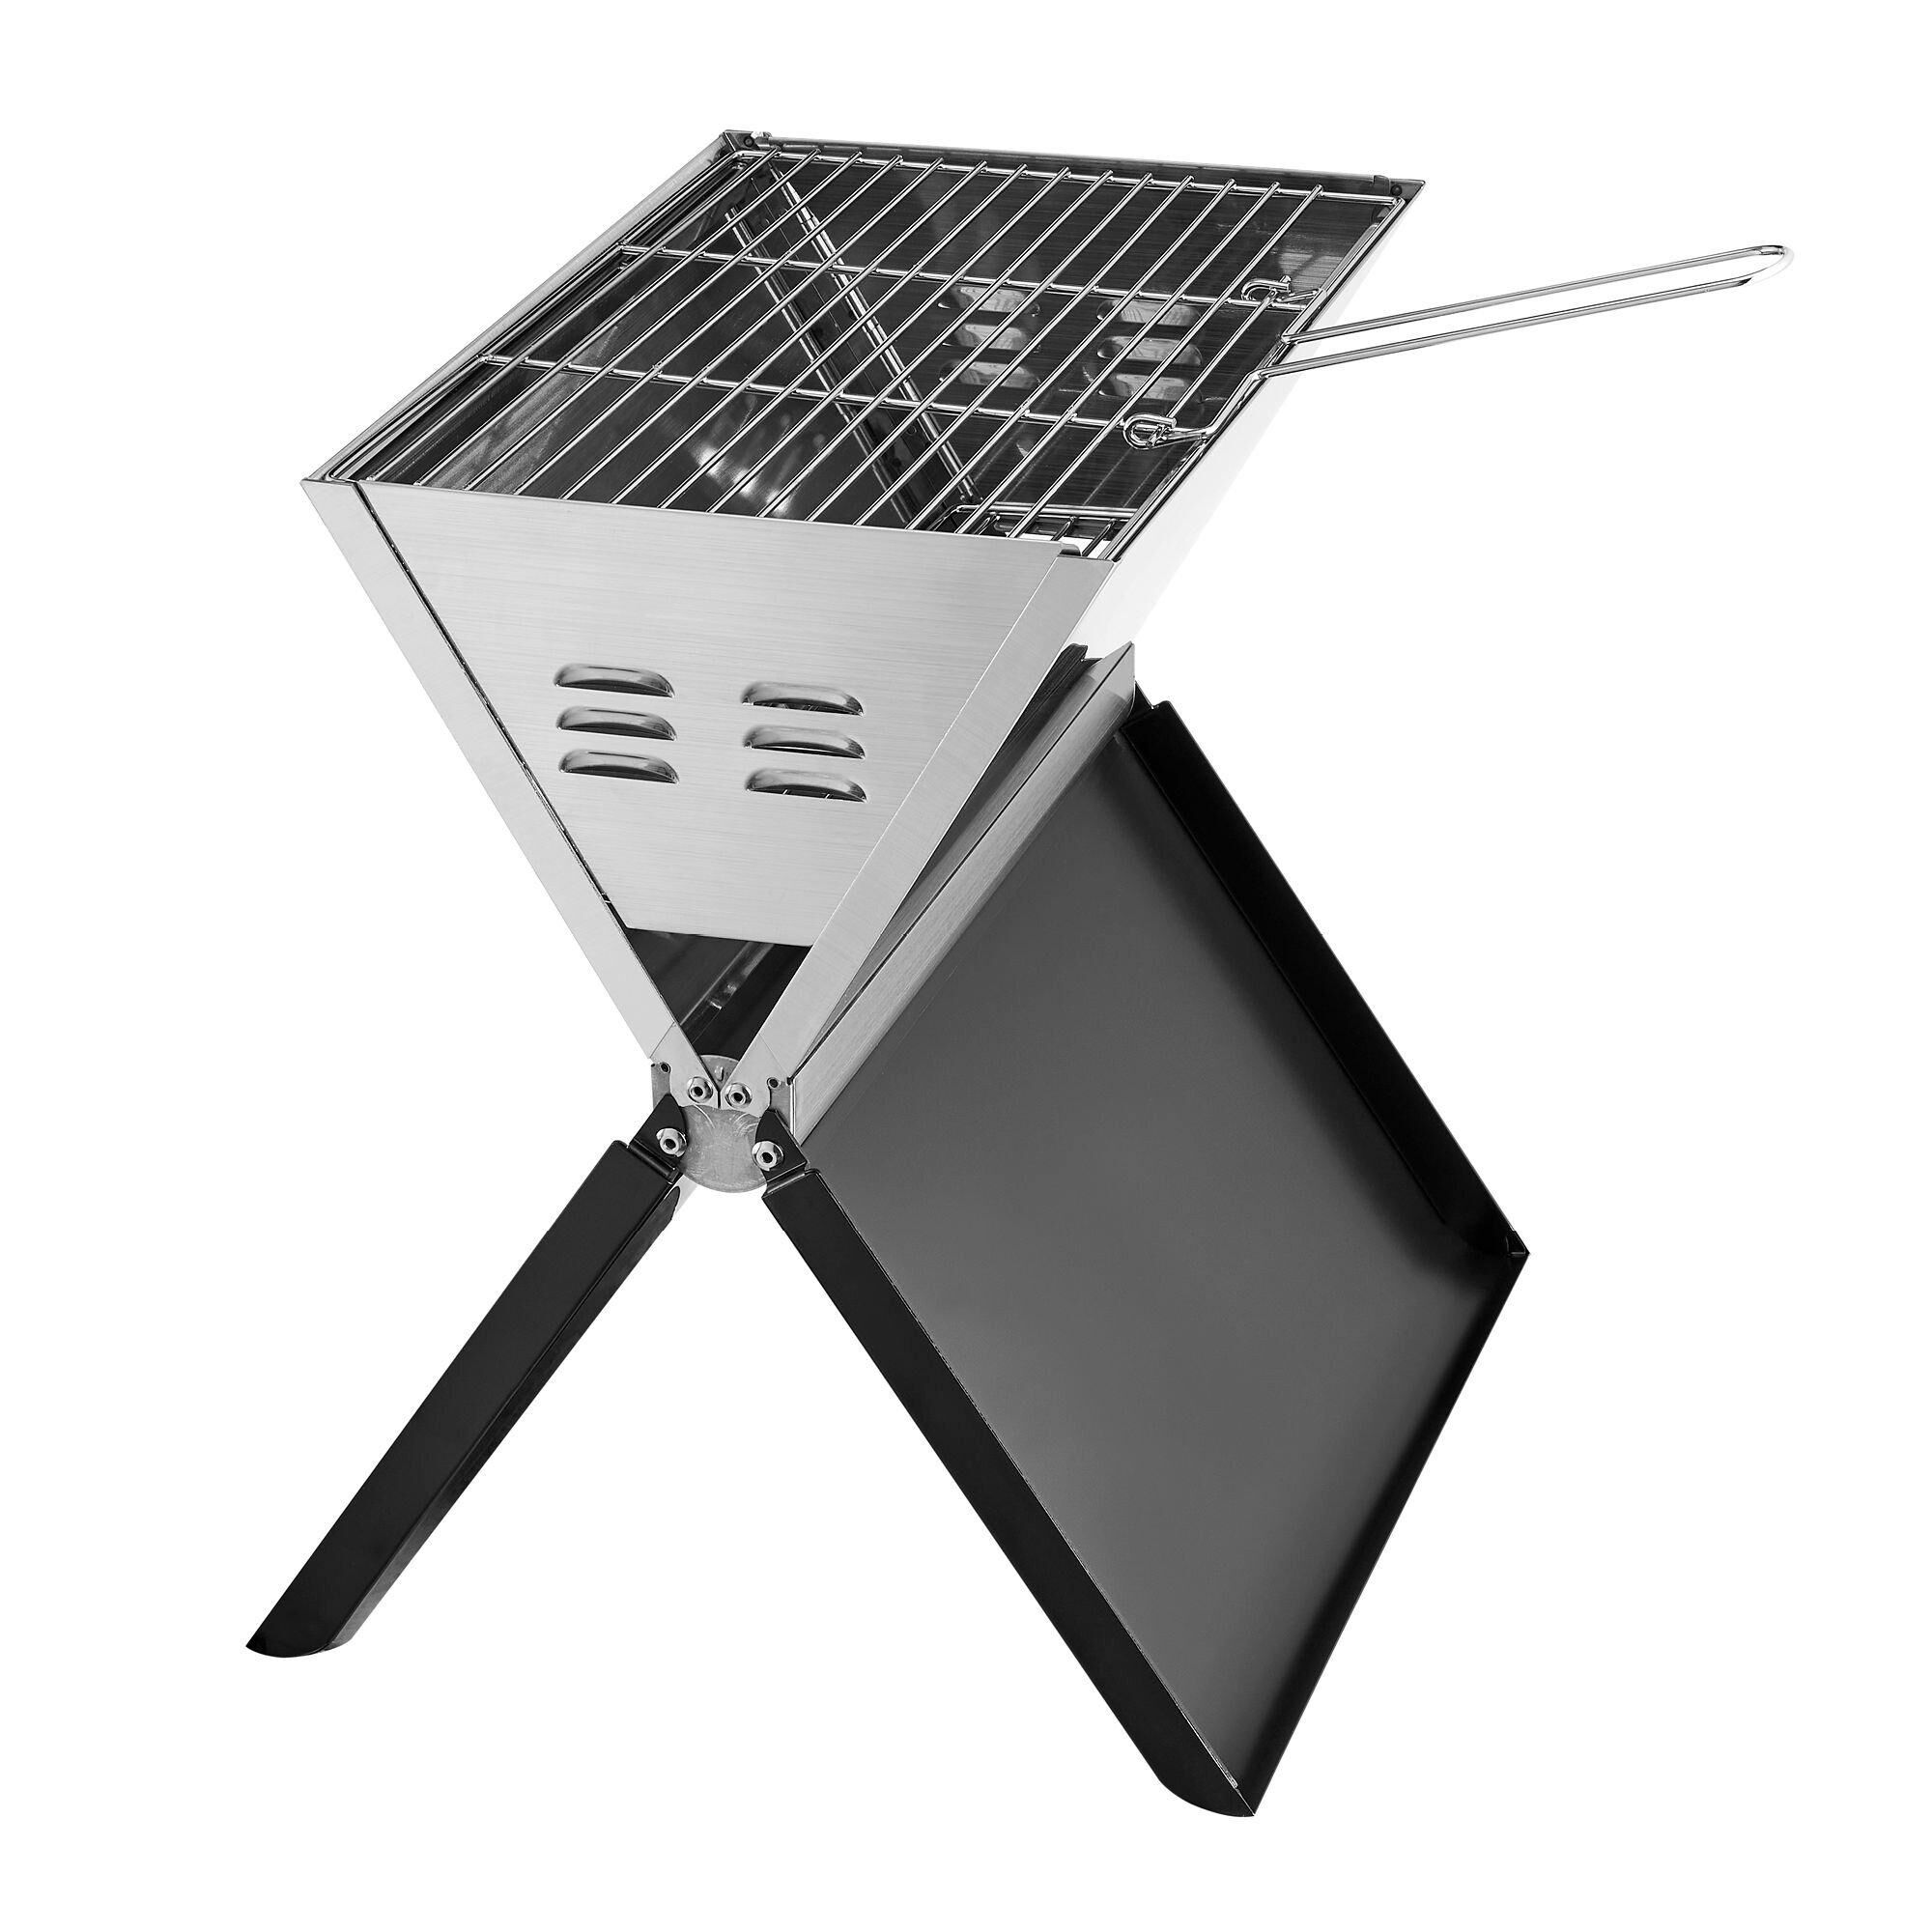 LIVIVO Foldable Portable BBQ Charcoal Grill - Stainless Steel Design